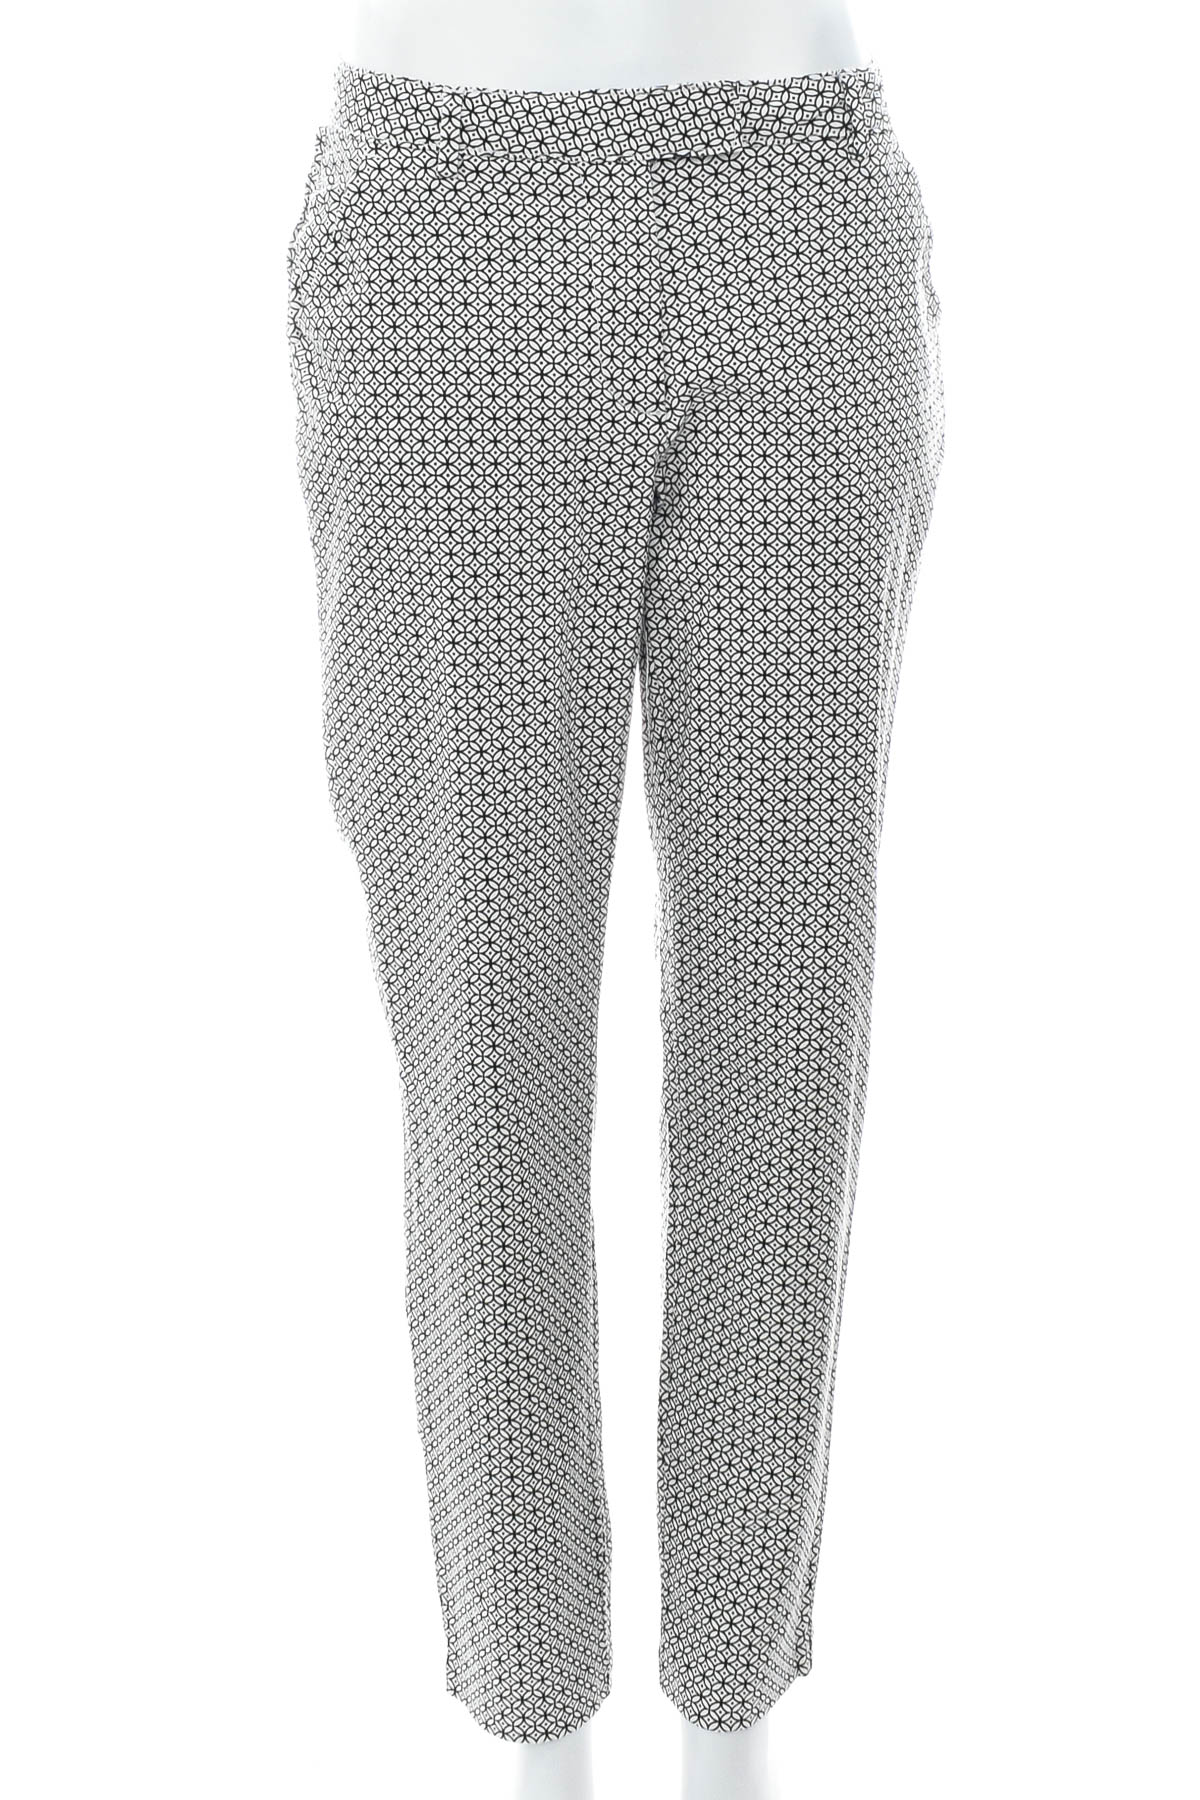 Women's trousers - WOMEN essentials by Tchibo - 0